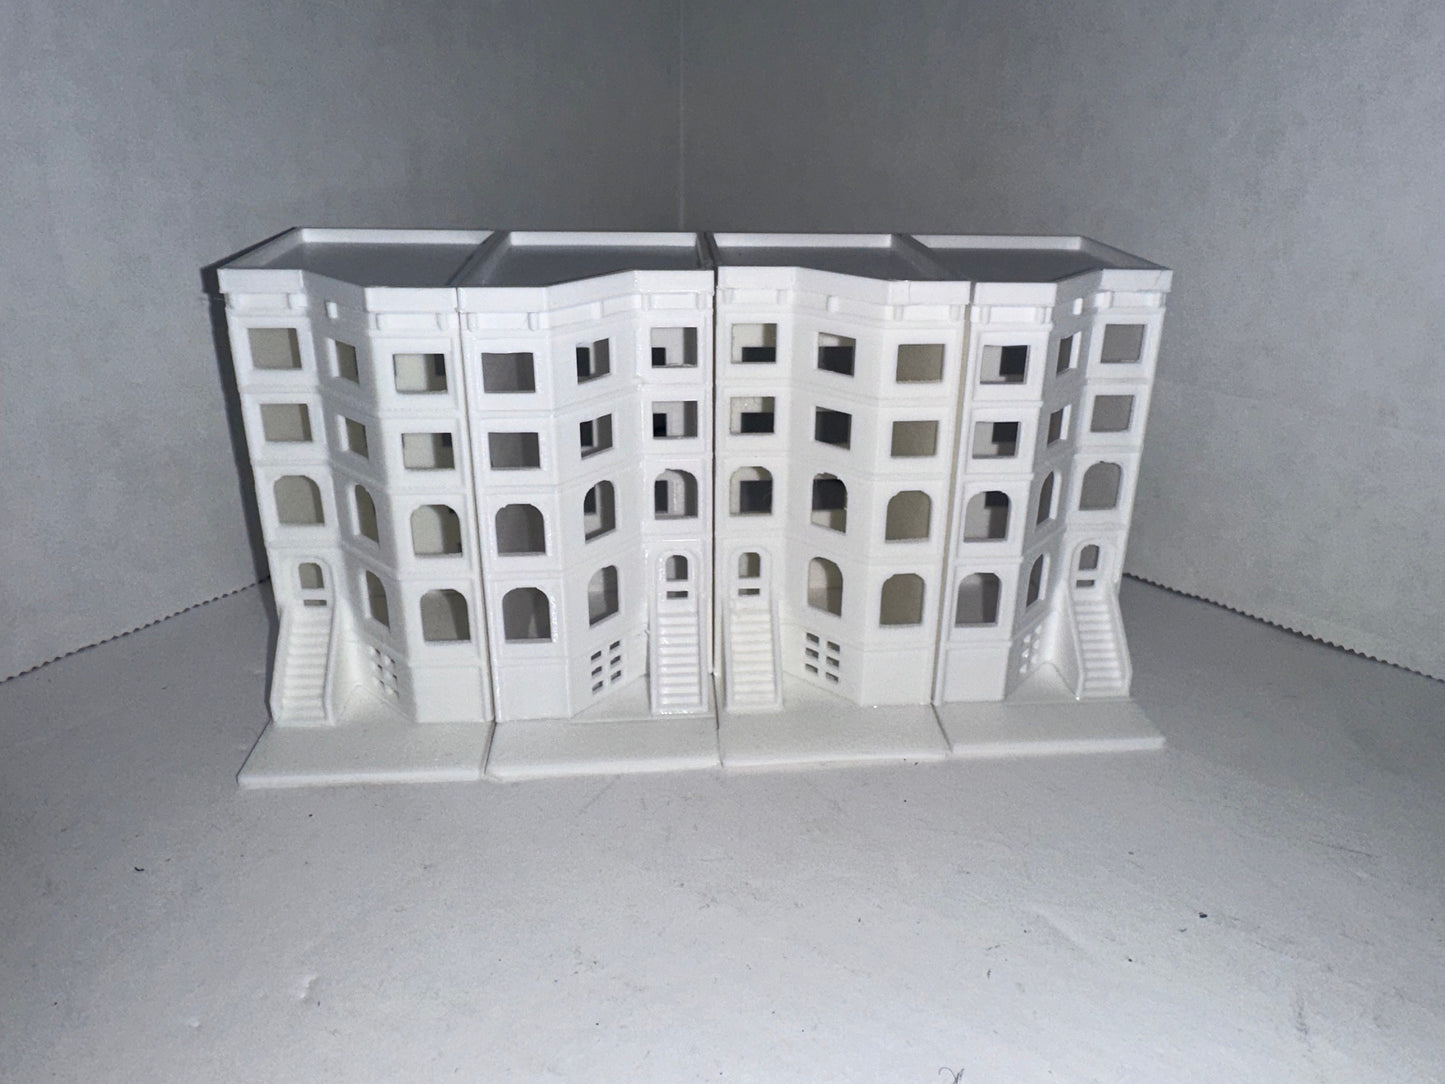 N - Scale Townhouses (4 Pack) City Buildings 1:160 White Unpainted Urban Scenery for Train set background / diorama.